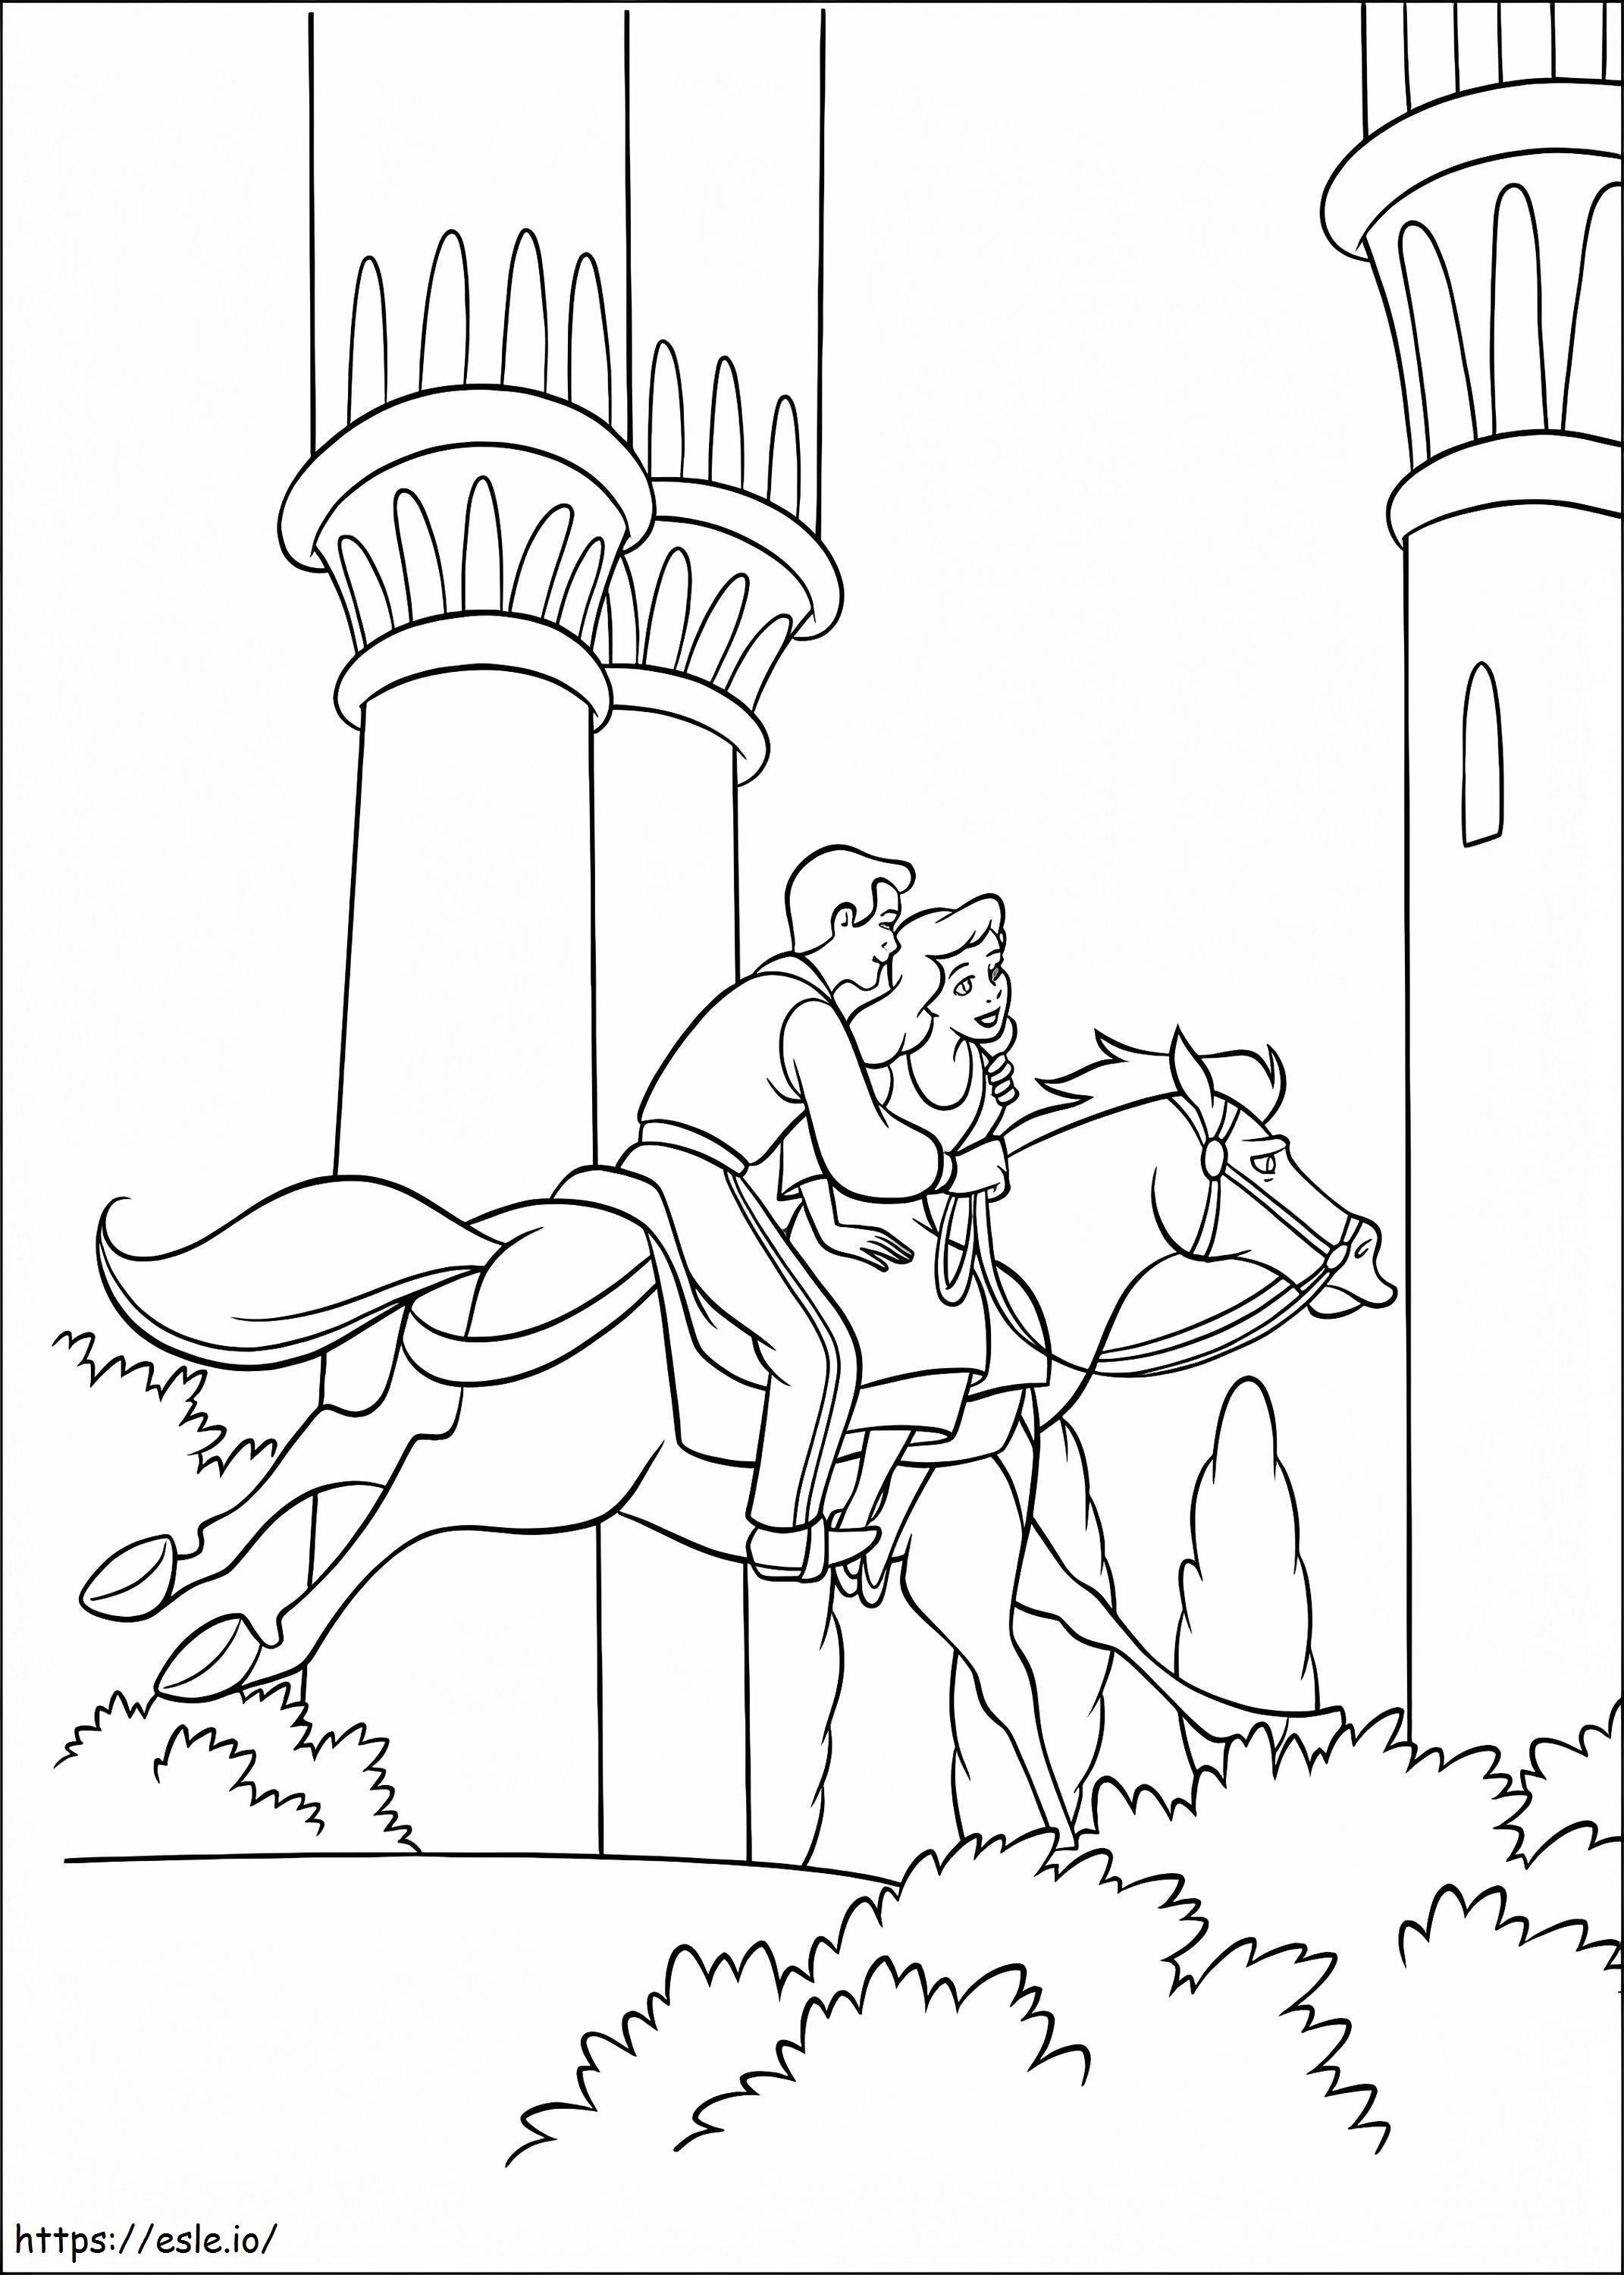 Cinderella And Prince On Horse coloring page